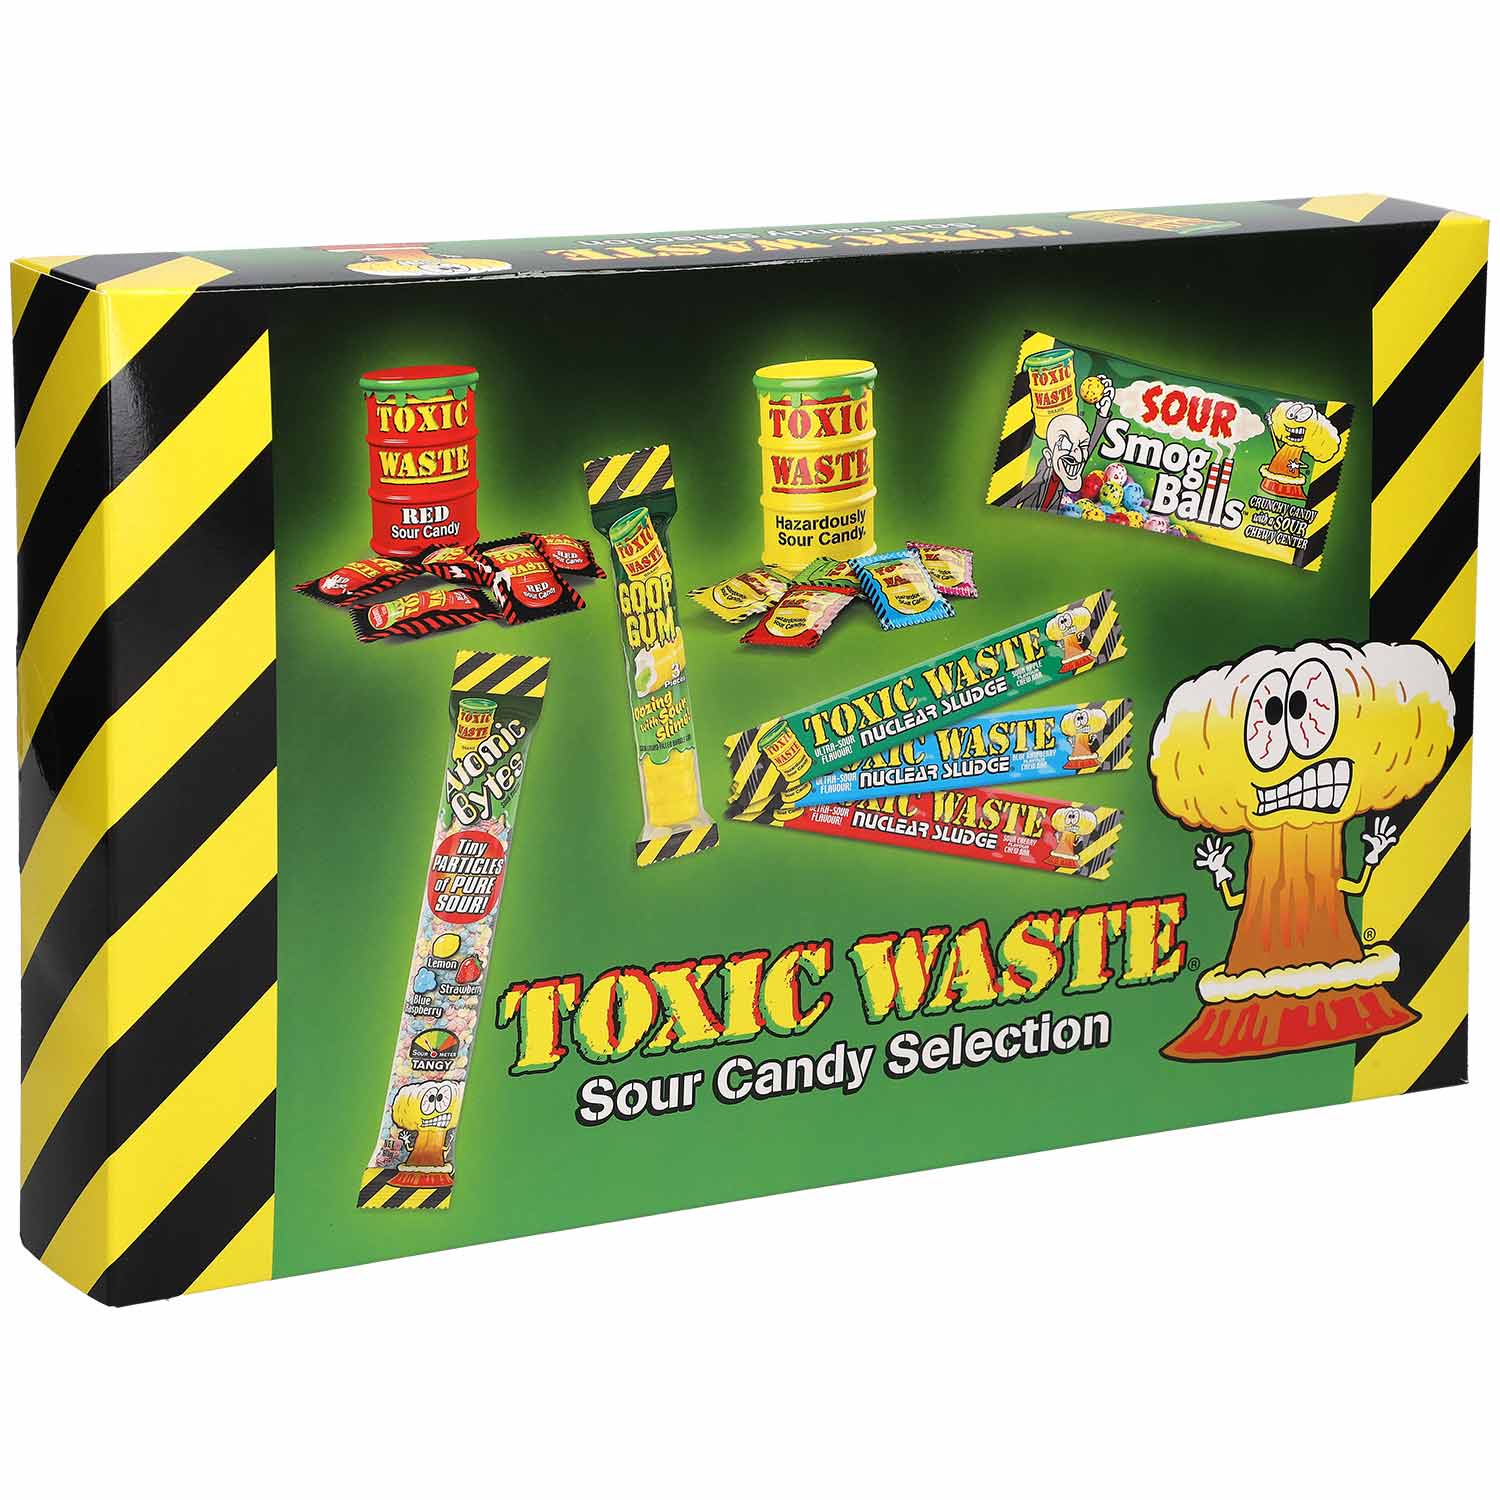 Toxic Waste Sour candy